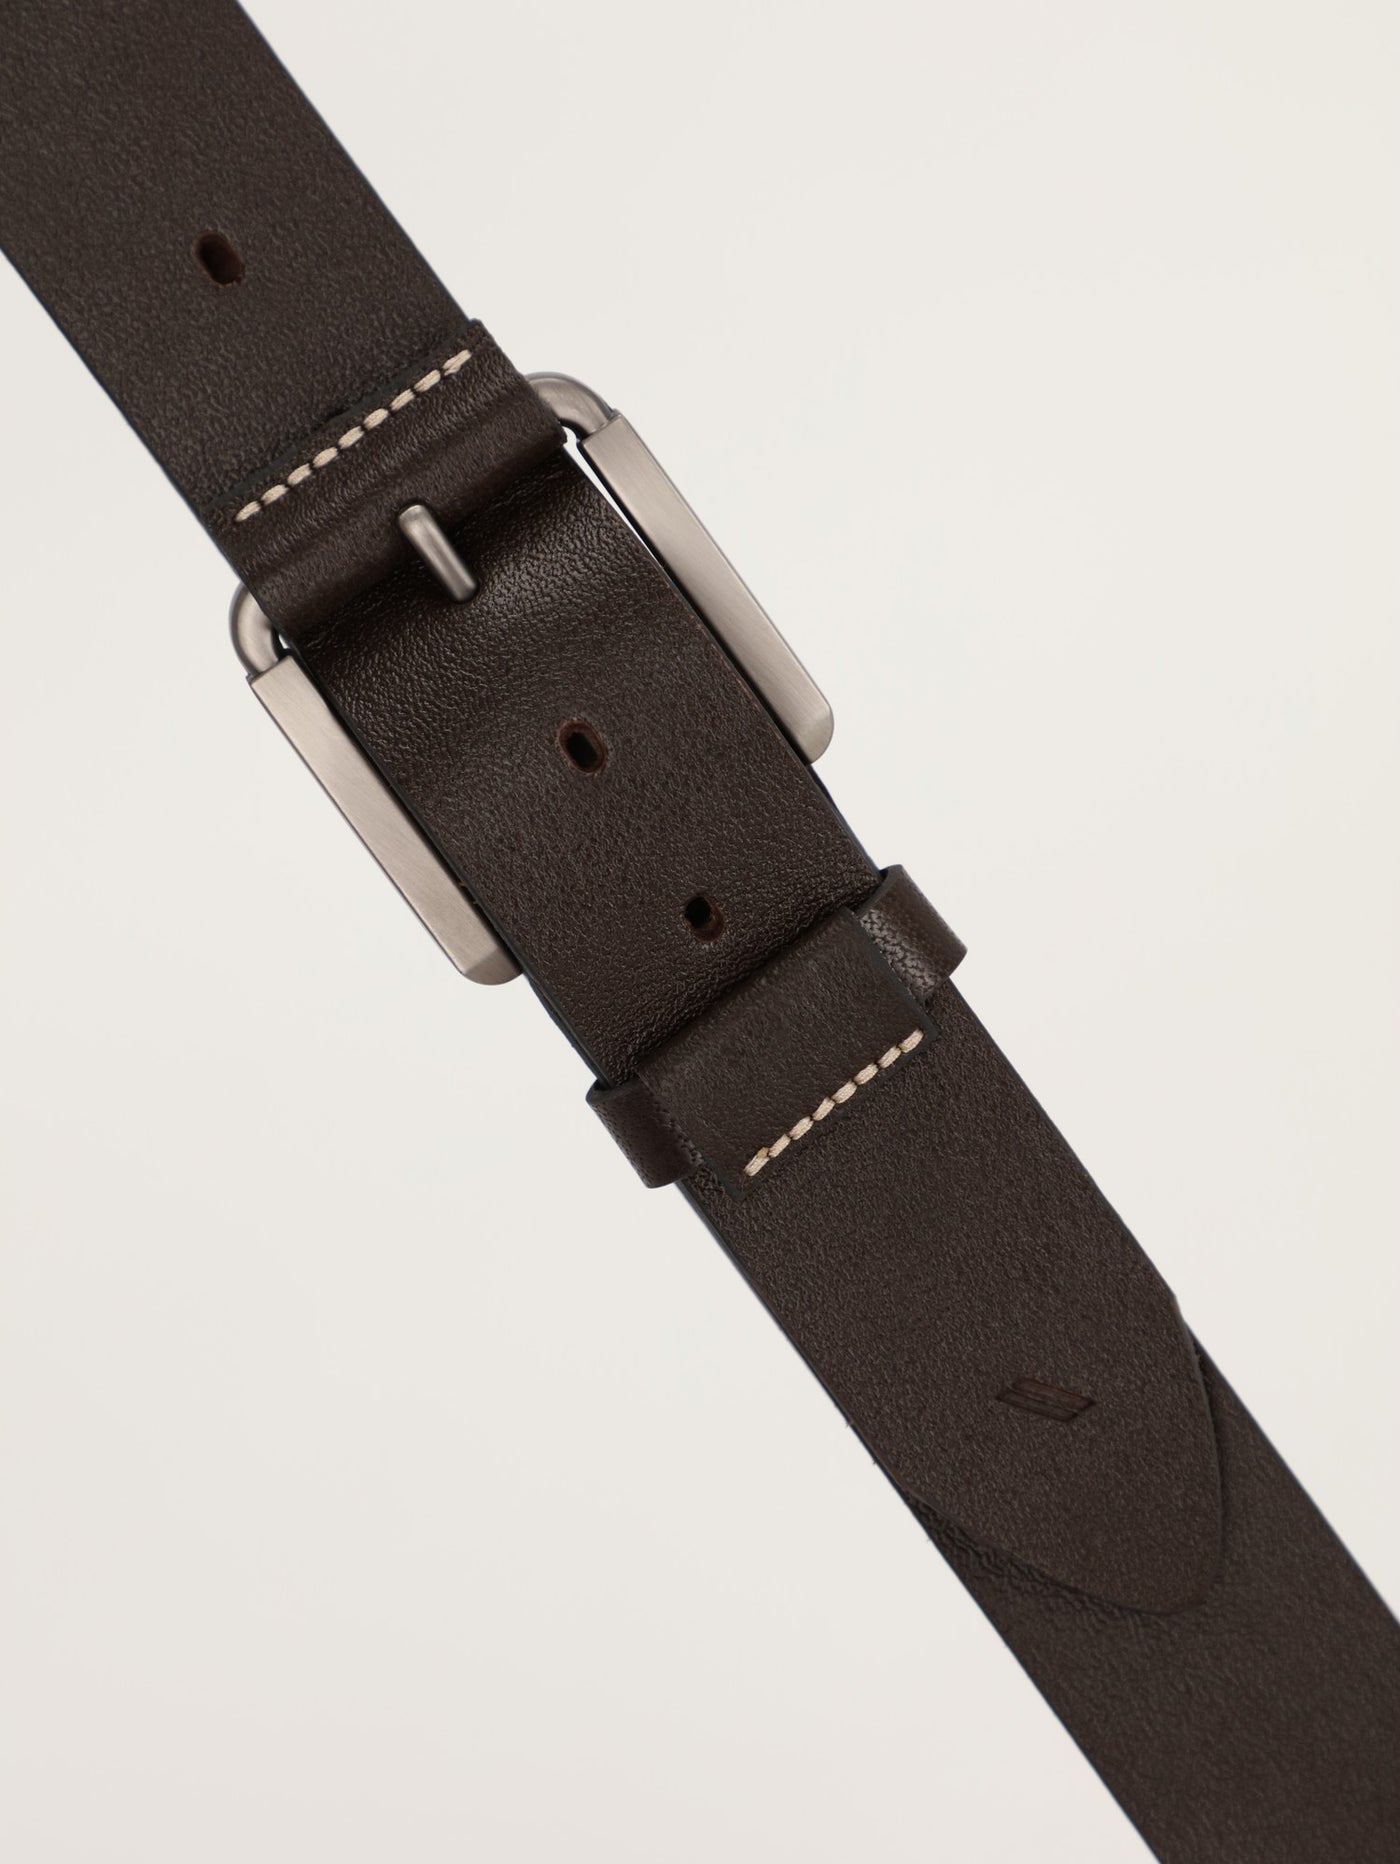 Smooth Leather Belt with Single Prong Buckle